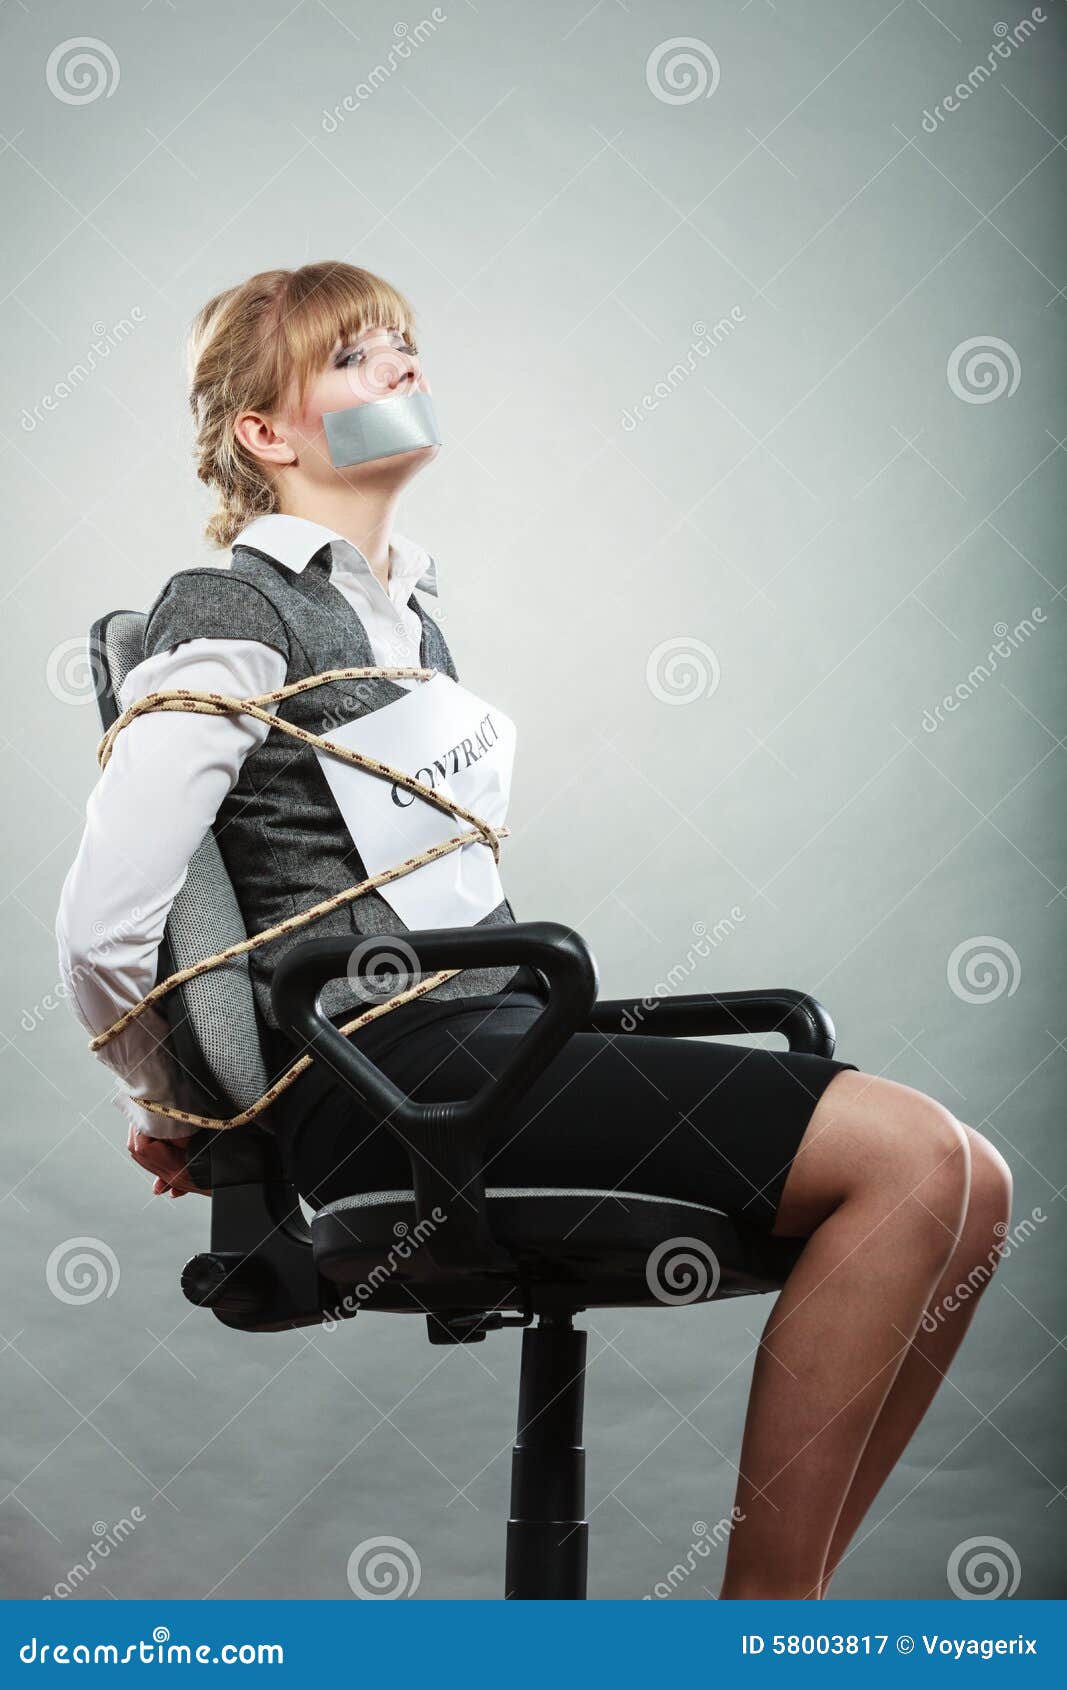 Women Tied To Chair pussy close